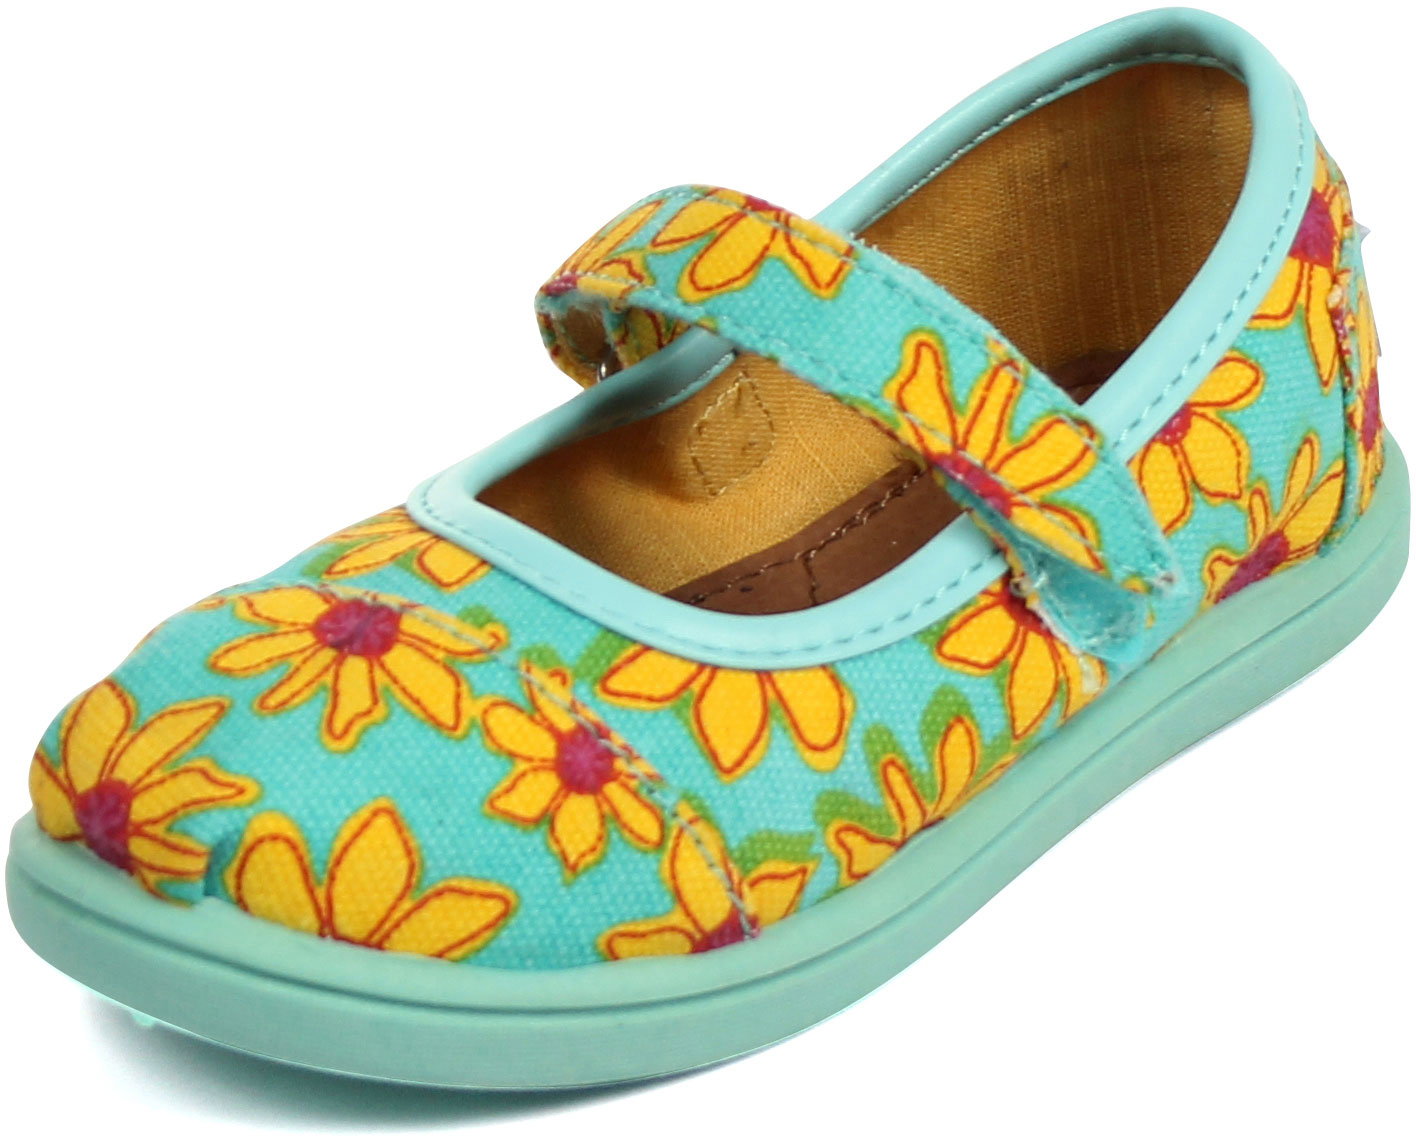 Toms - Unisex-Baby Mary Jane Shoes In Yellow Daisy